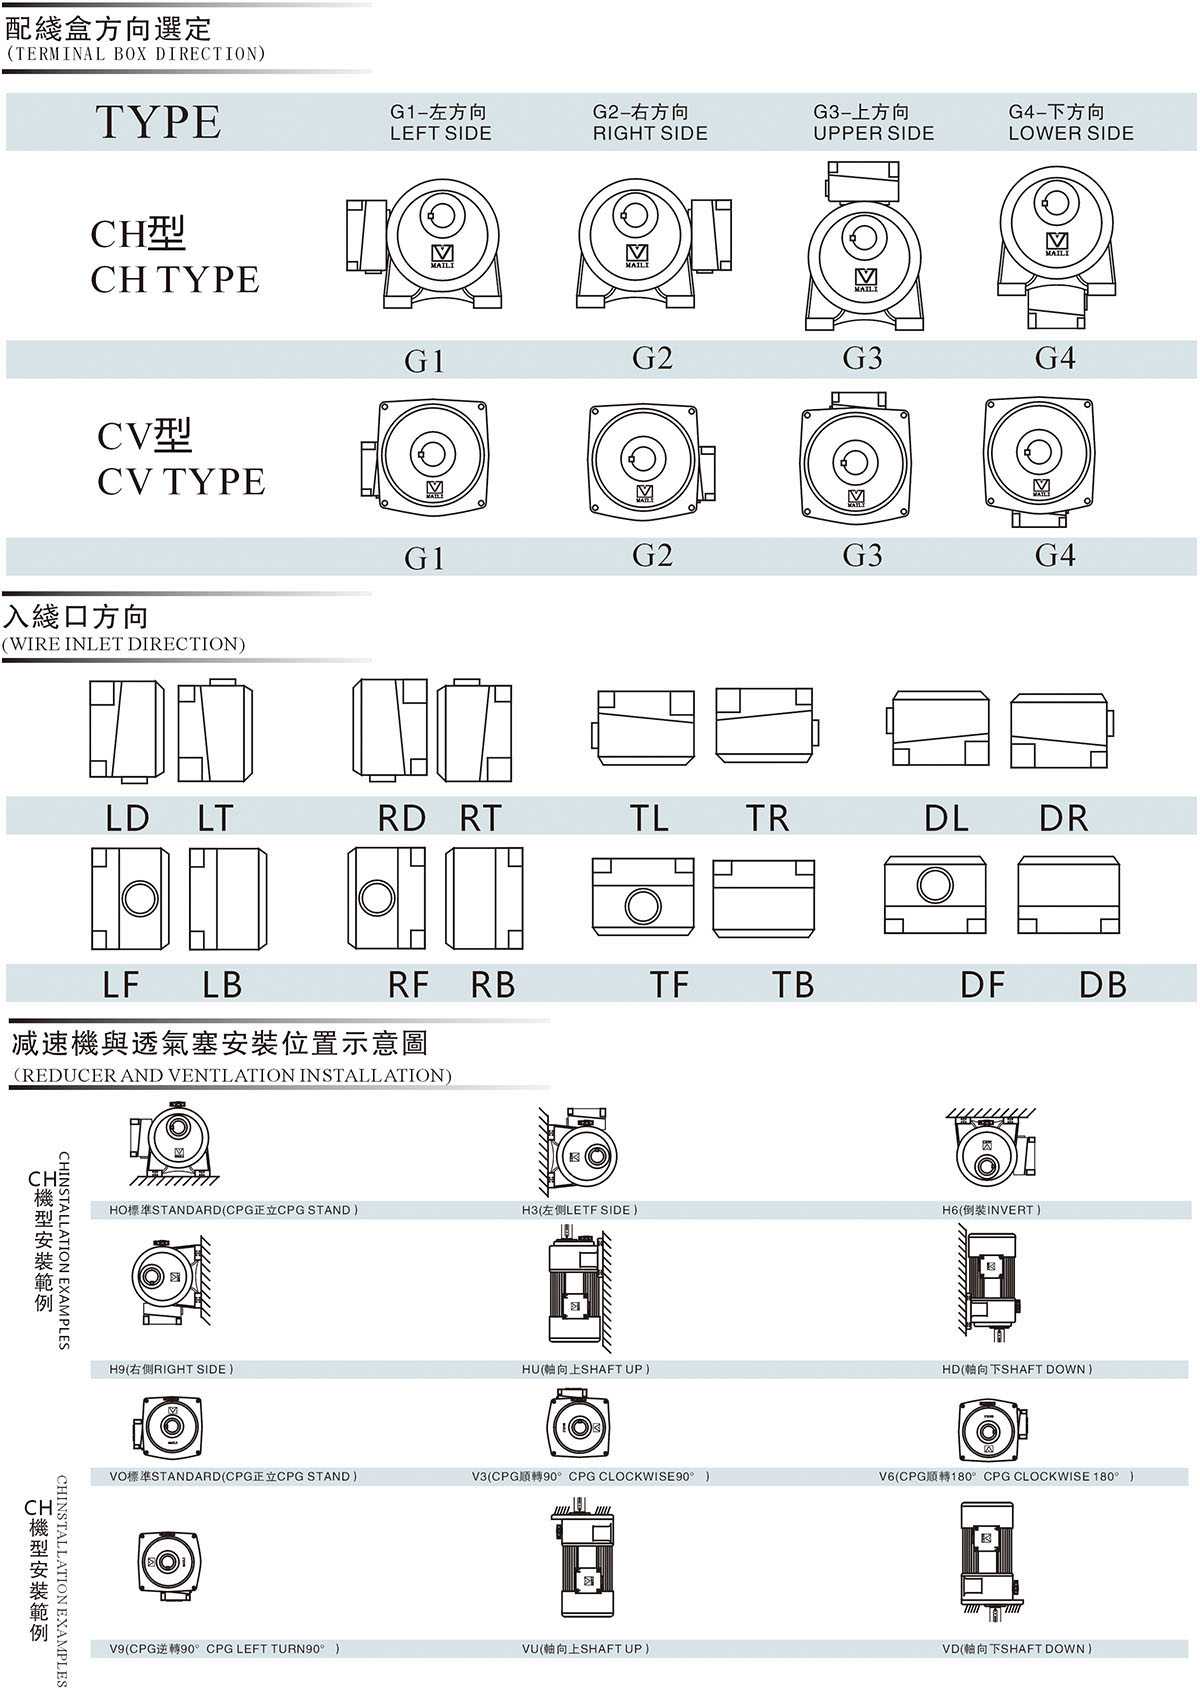 Wiring box specifications